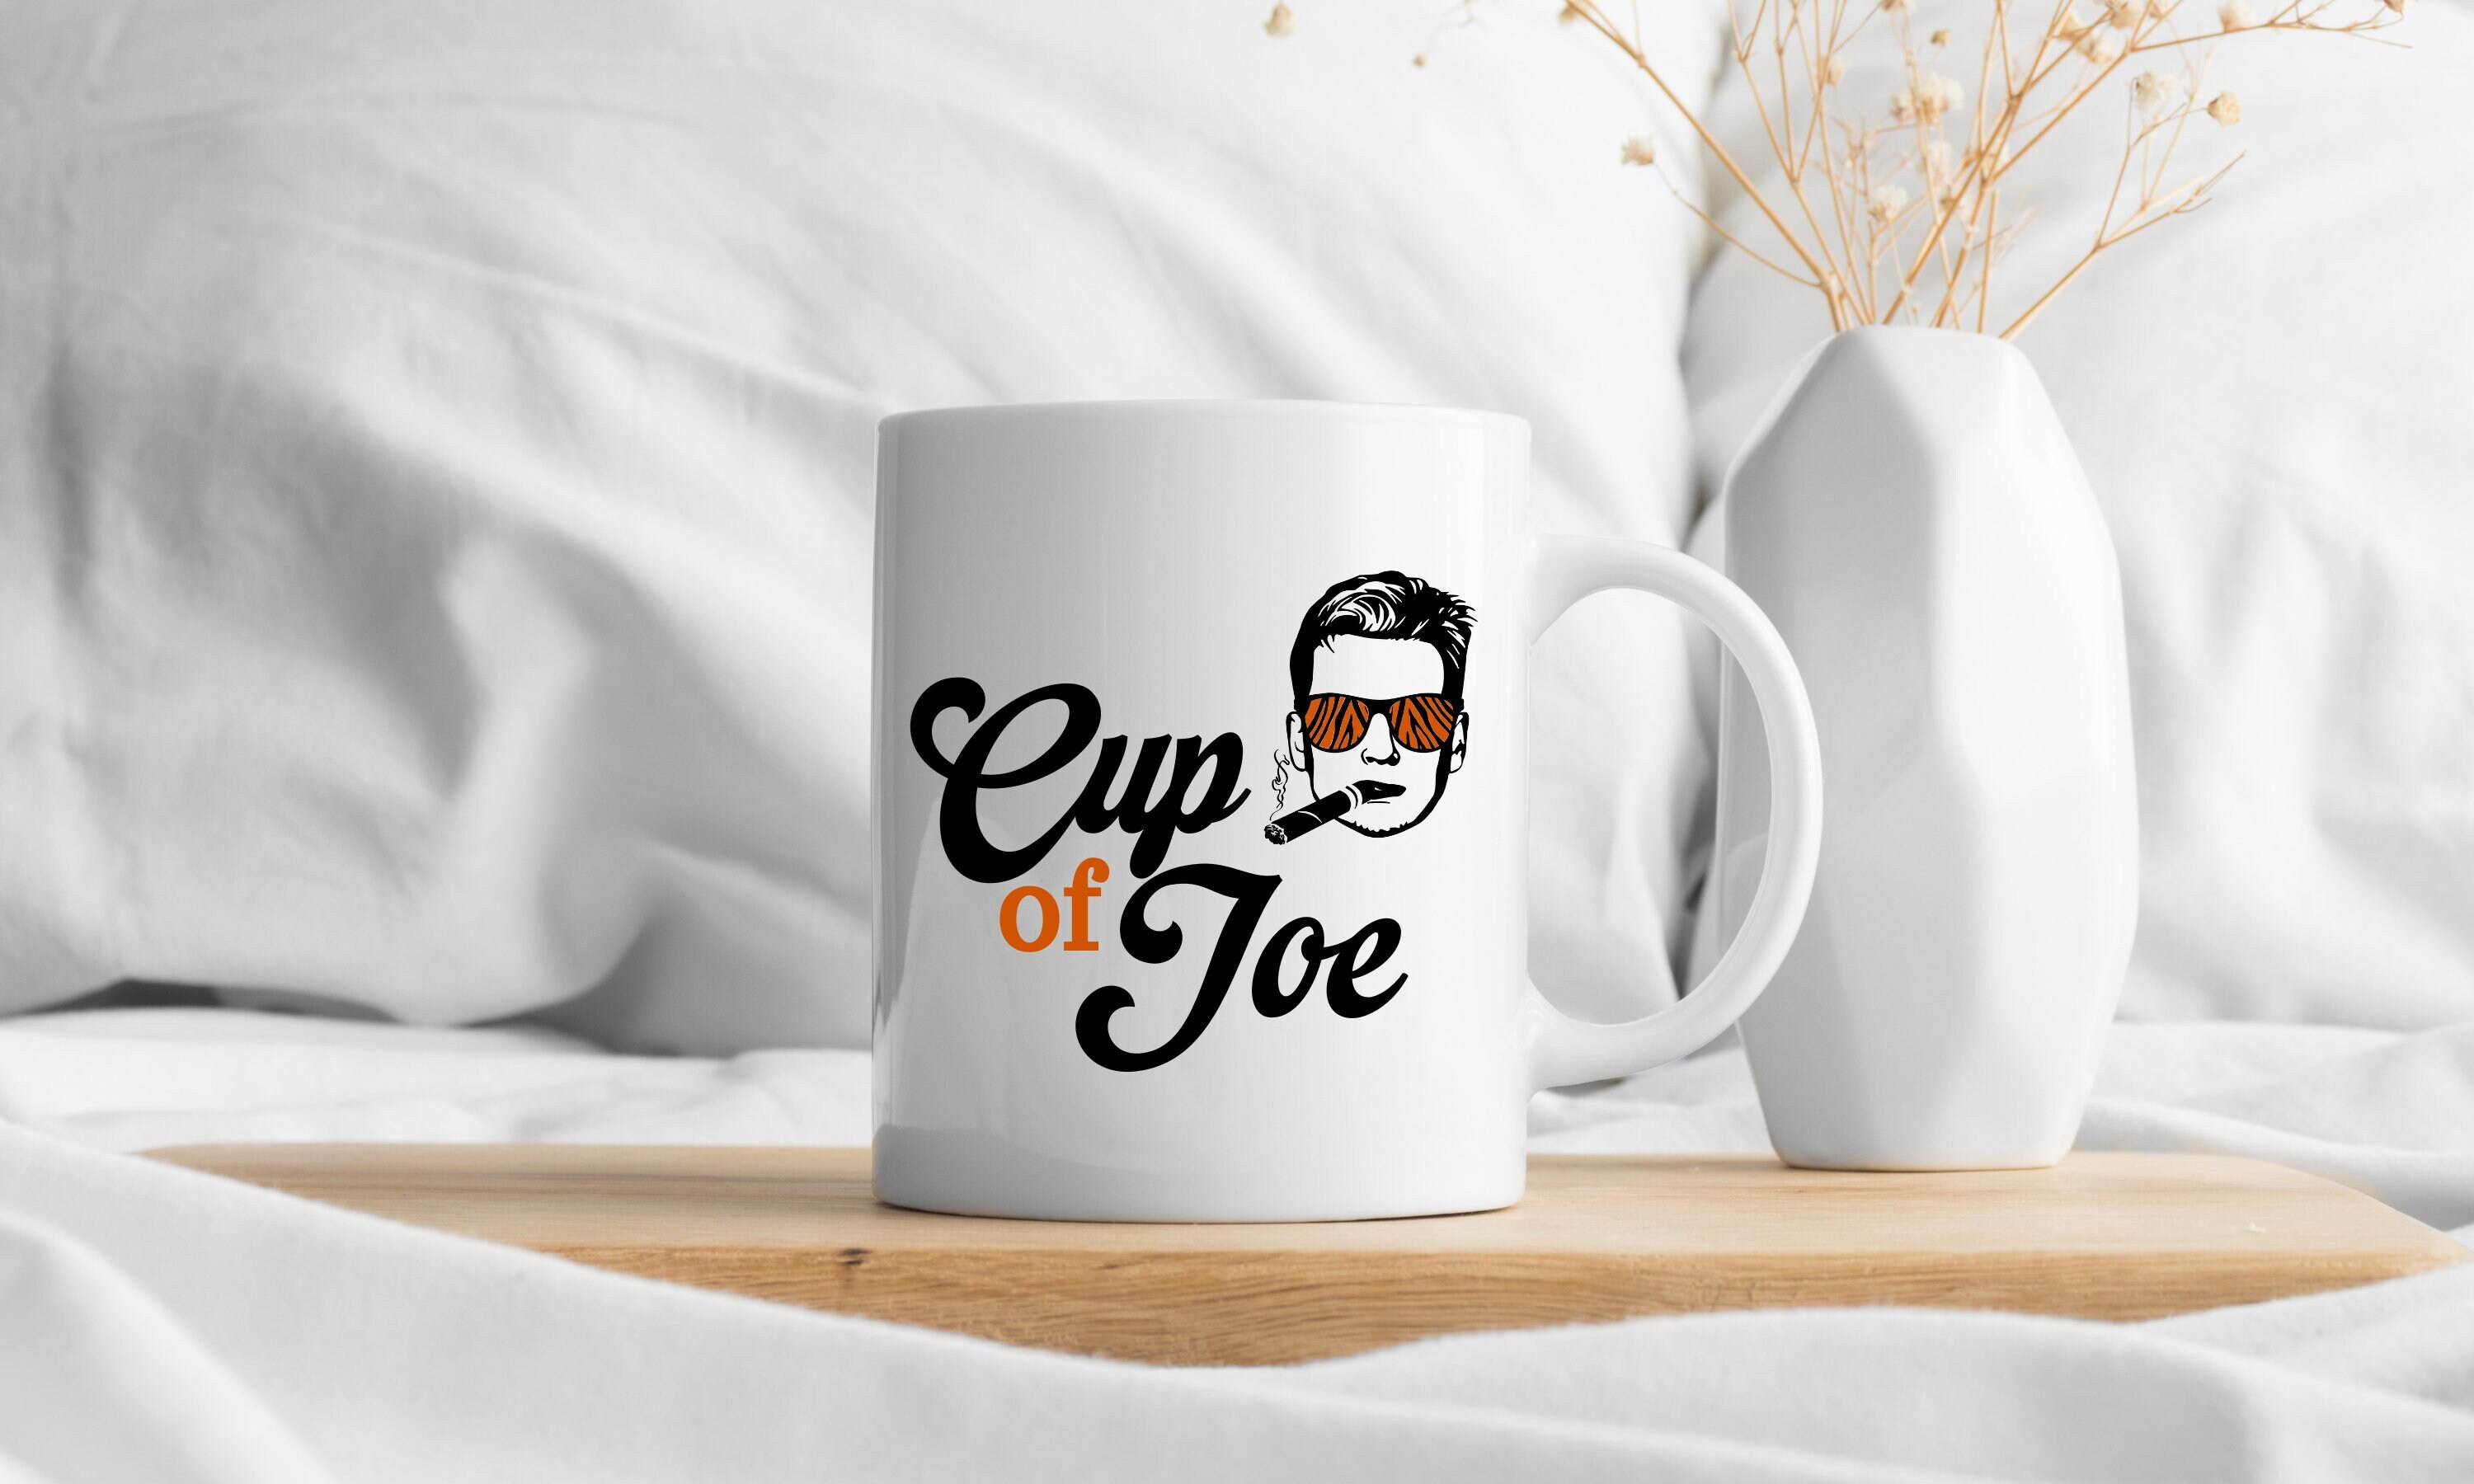 The Best Coffee Mugs to Improve Your Everyday Cup of Joe